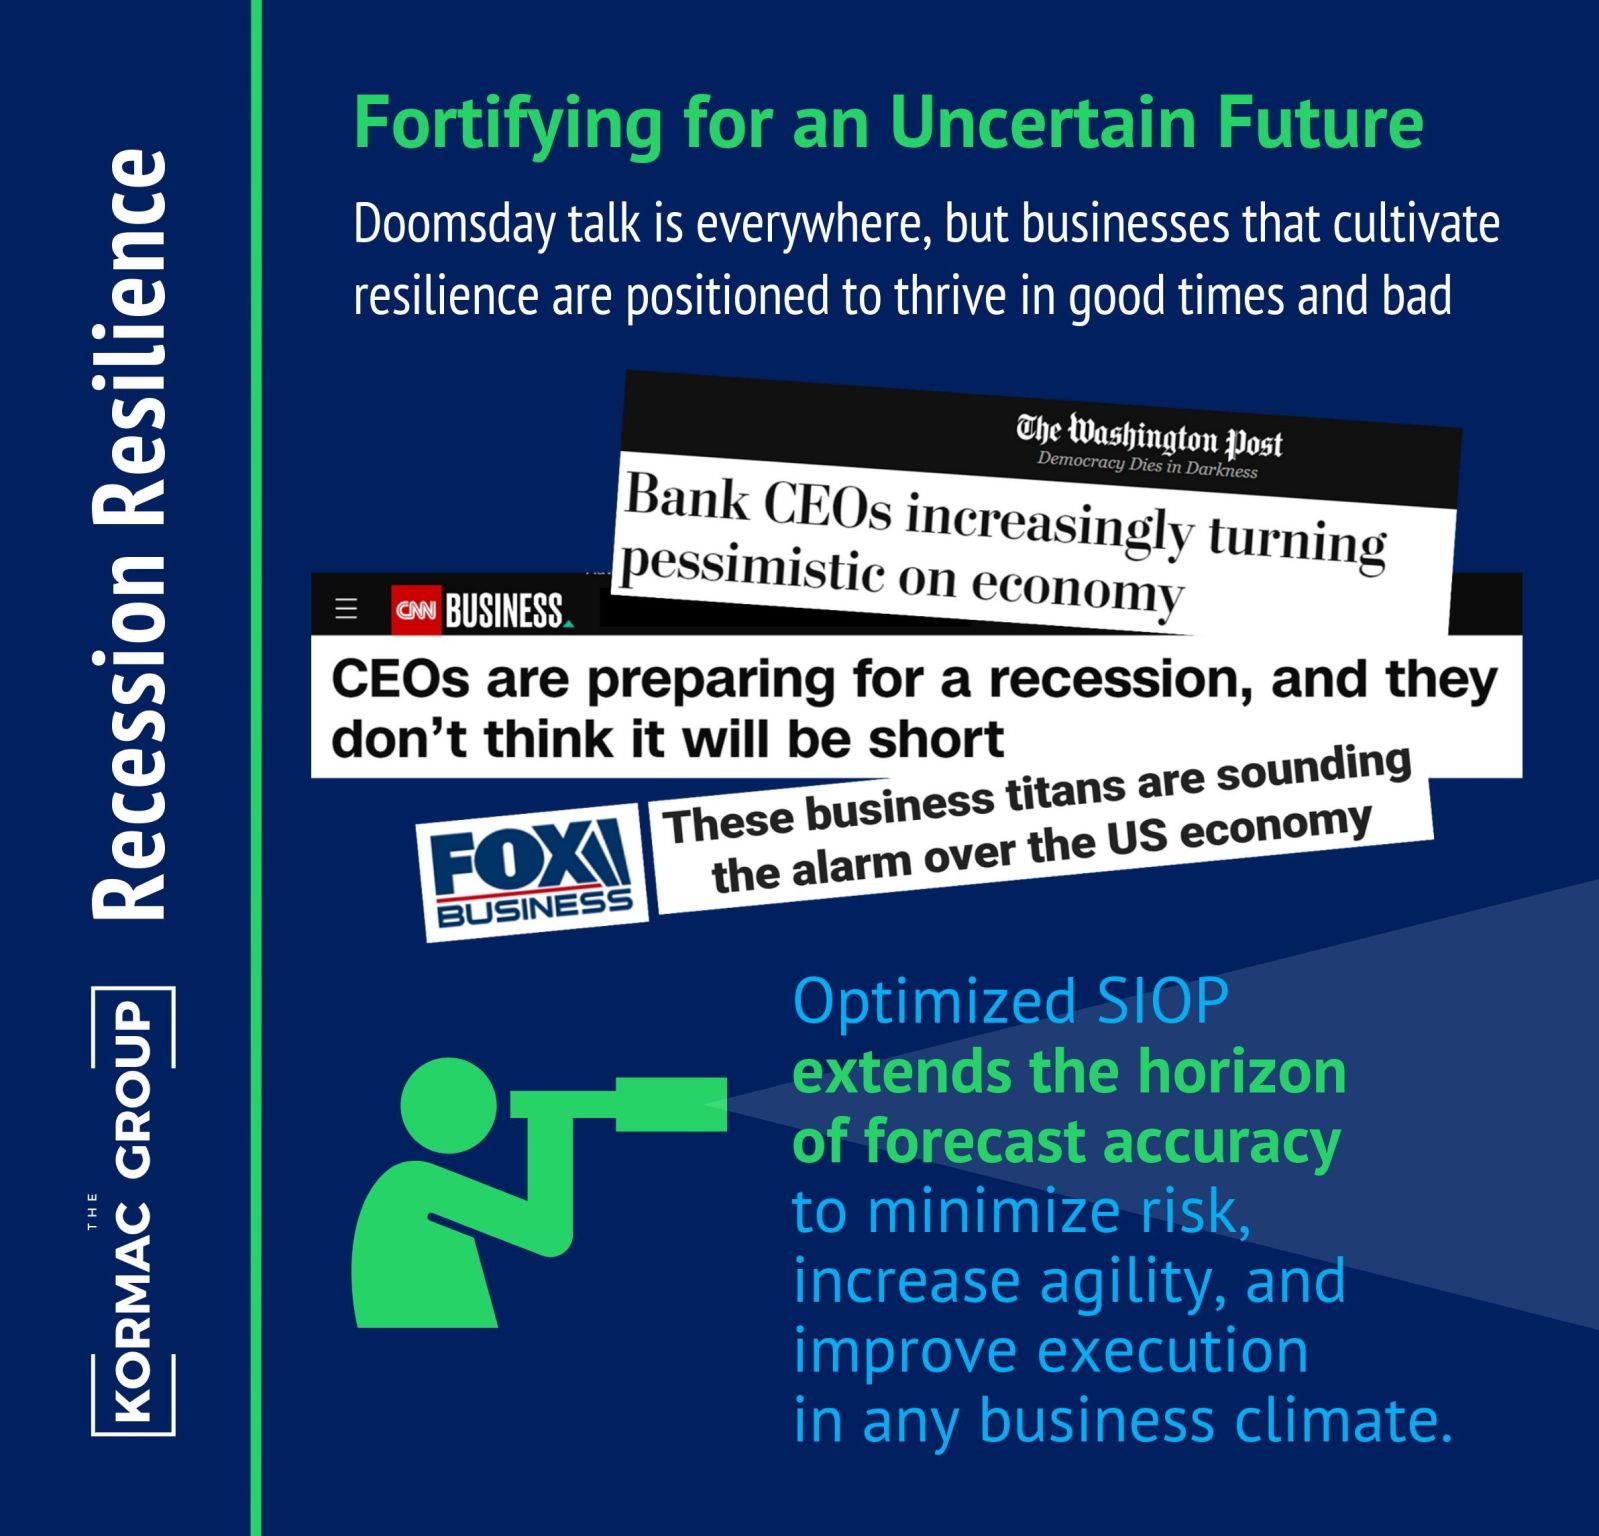 Recession Resilience Fortifying for an Uncertain Future Doomsday talk is everywhere, but businesses that cultivate resilience are positioned to thrive in good times and bad [Screenshots of various news article titles about recessions and the economy] Optimized SIOP extends the horizon of forecast accuracy to minimize risk, increase agility, and improve execution in any business climate.